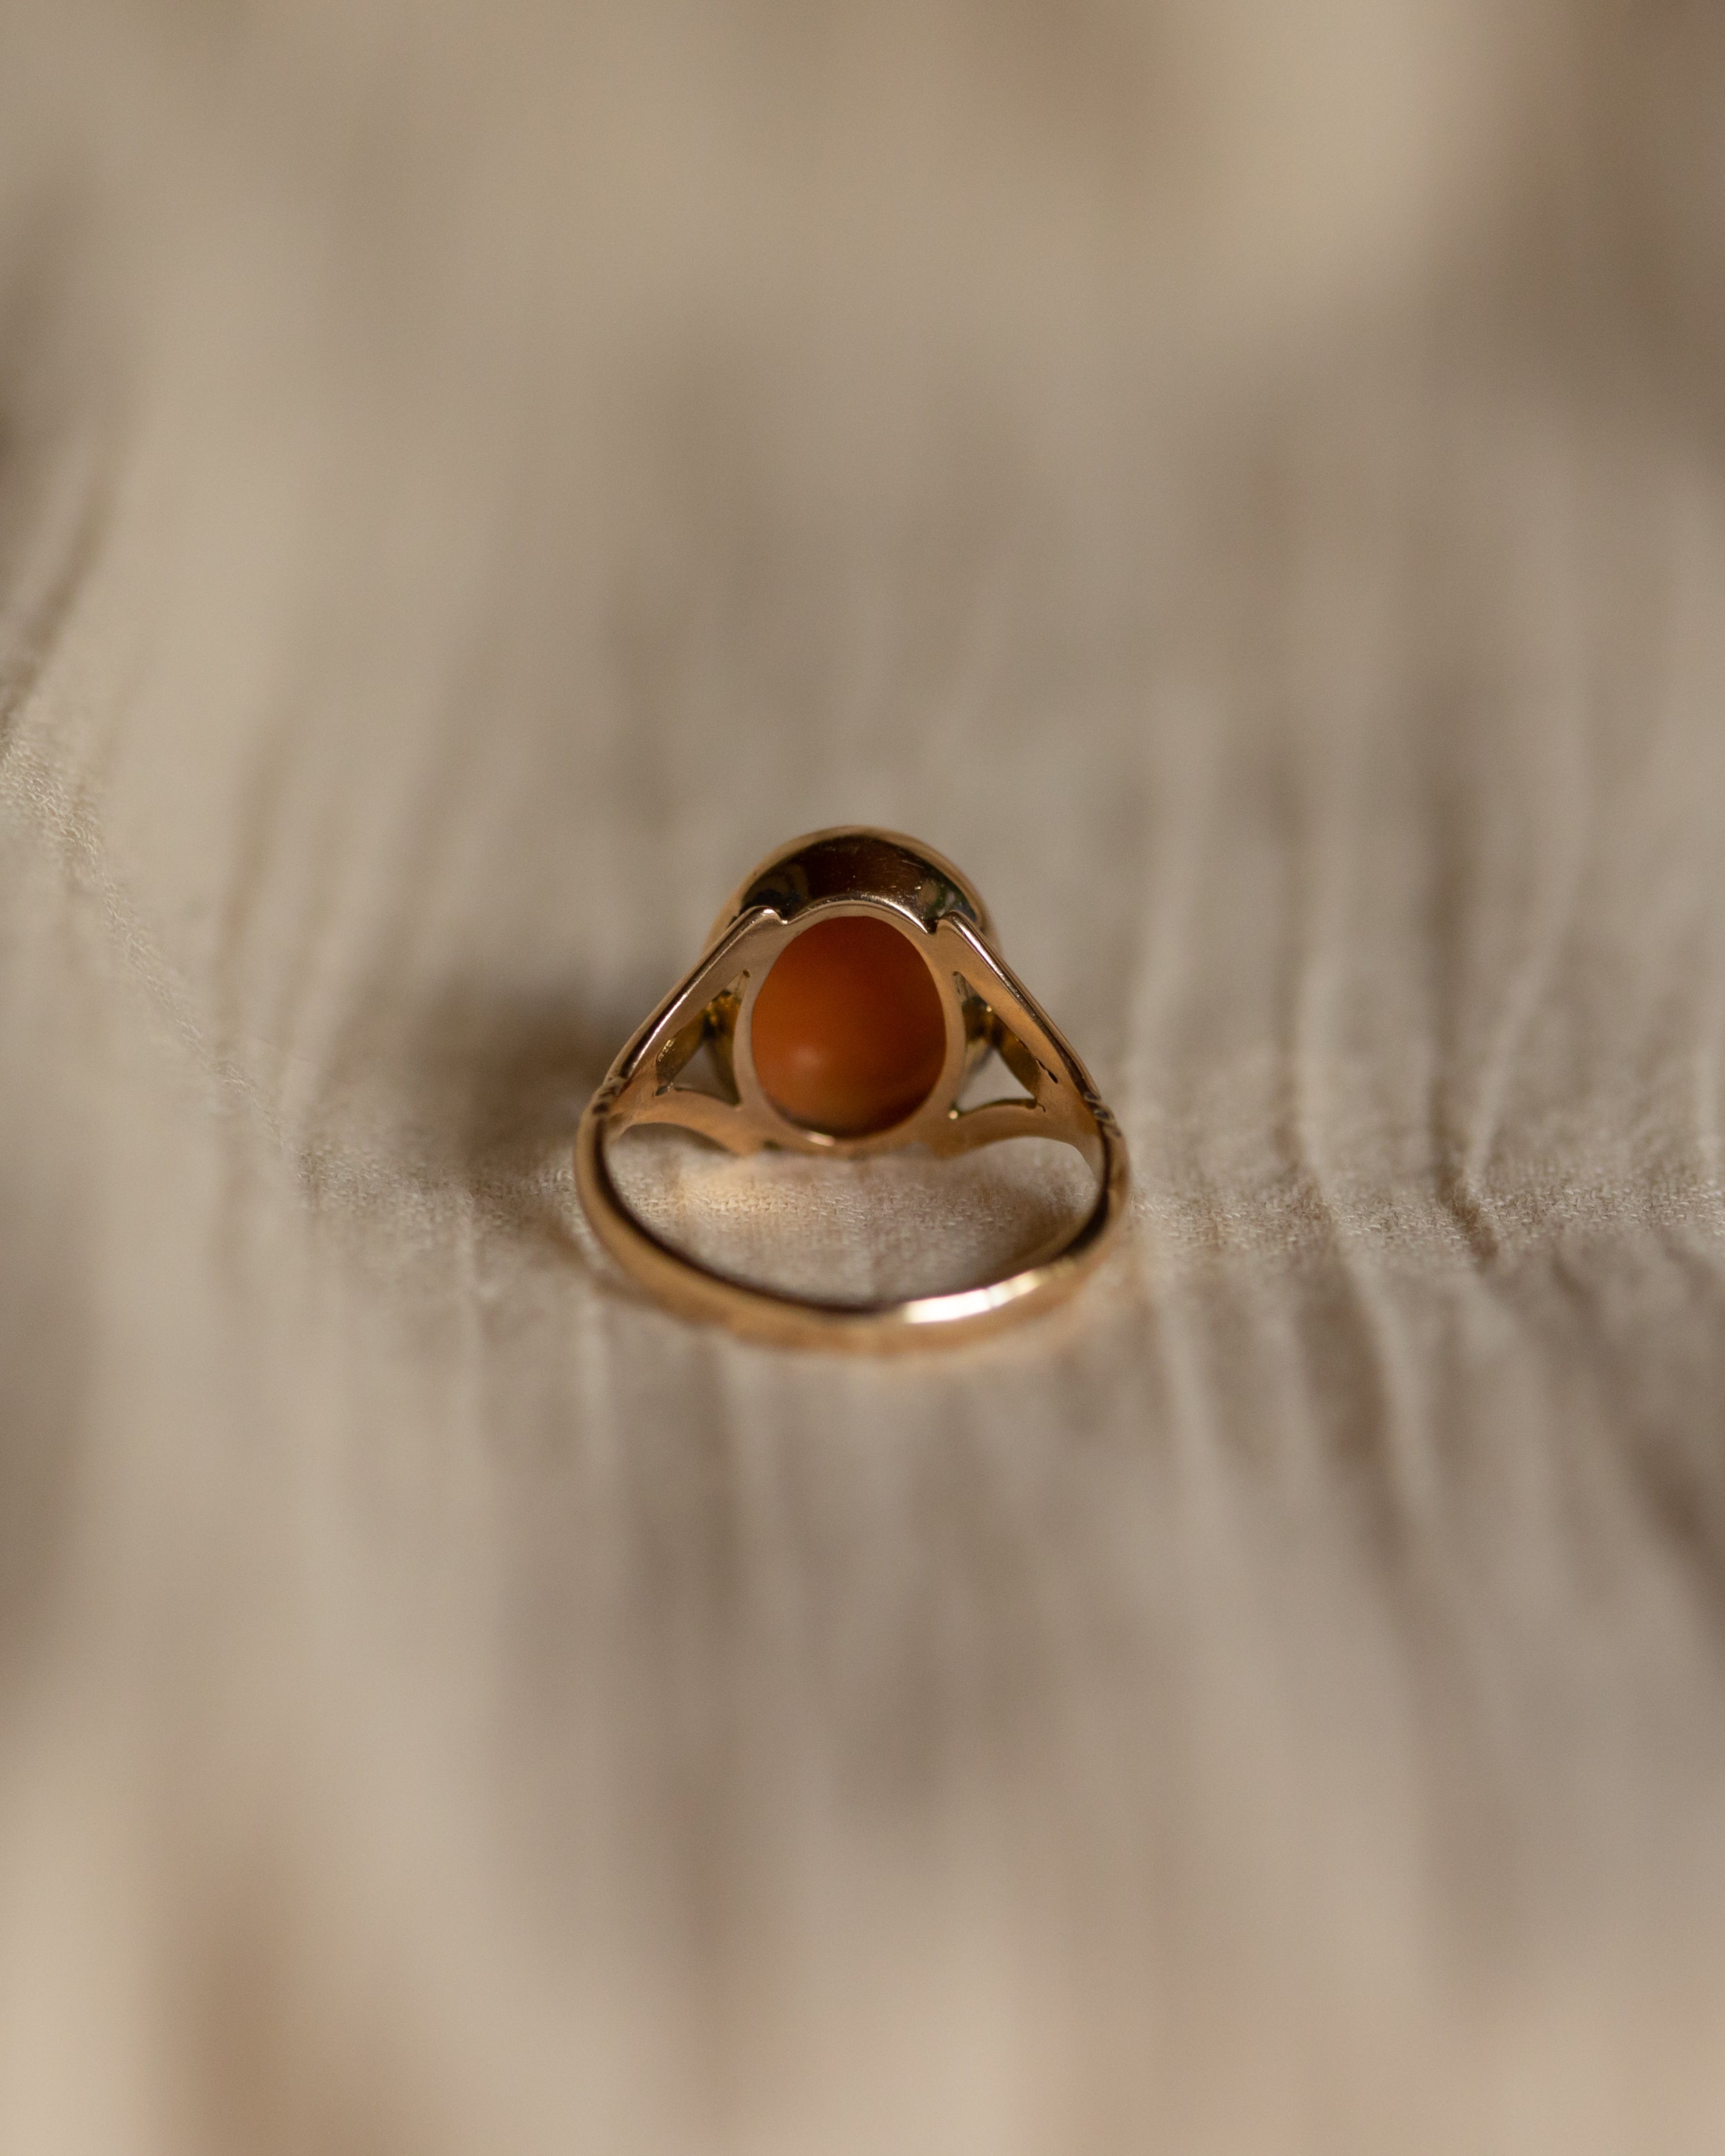 Ivy 1975 Vintage 9ct Gold Cameo Ring